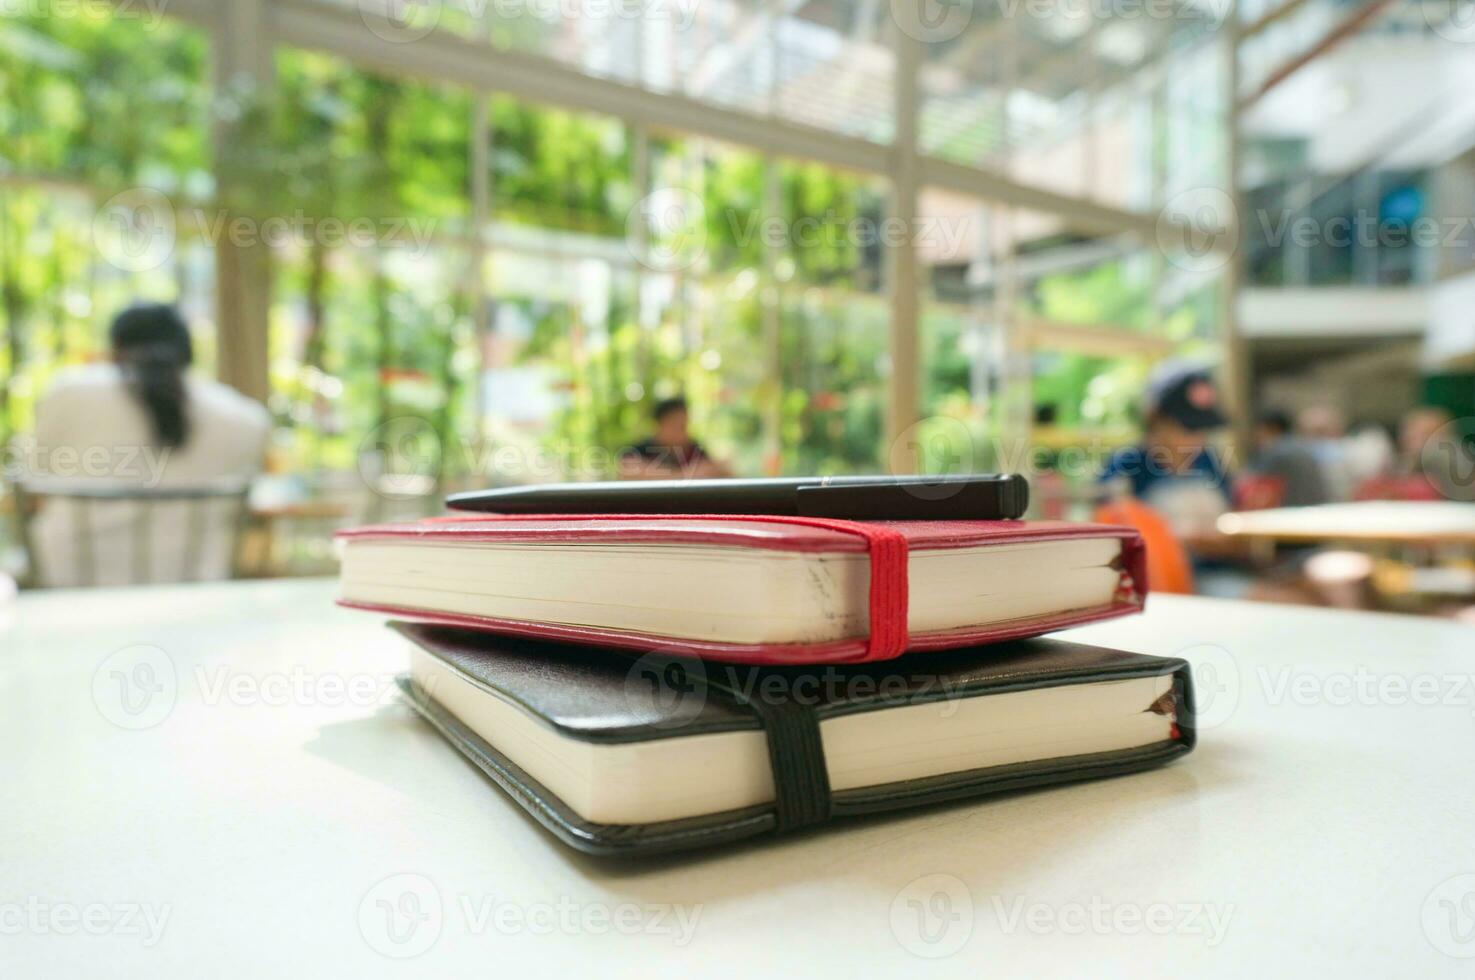 Book in library education learning concept photo